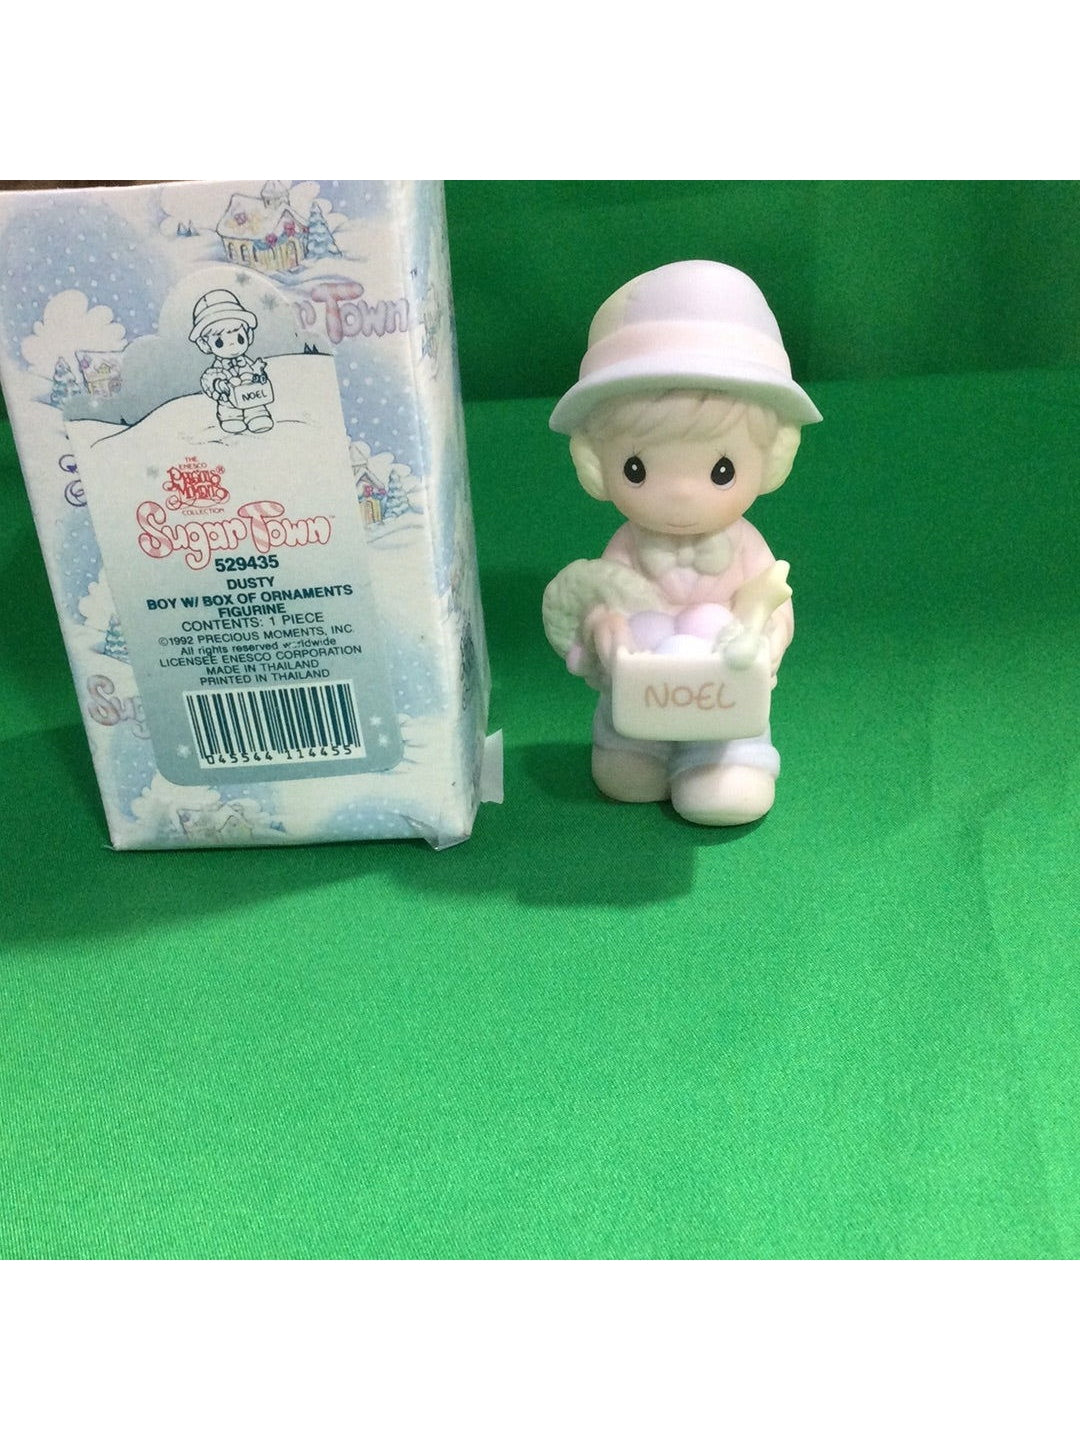 Precious Moments Dusty Boy with Box Of Ornaments Figurine - In Box - The Kennedy Collective Thrift - 